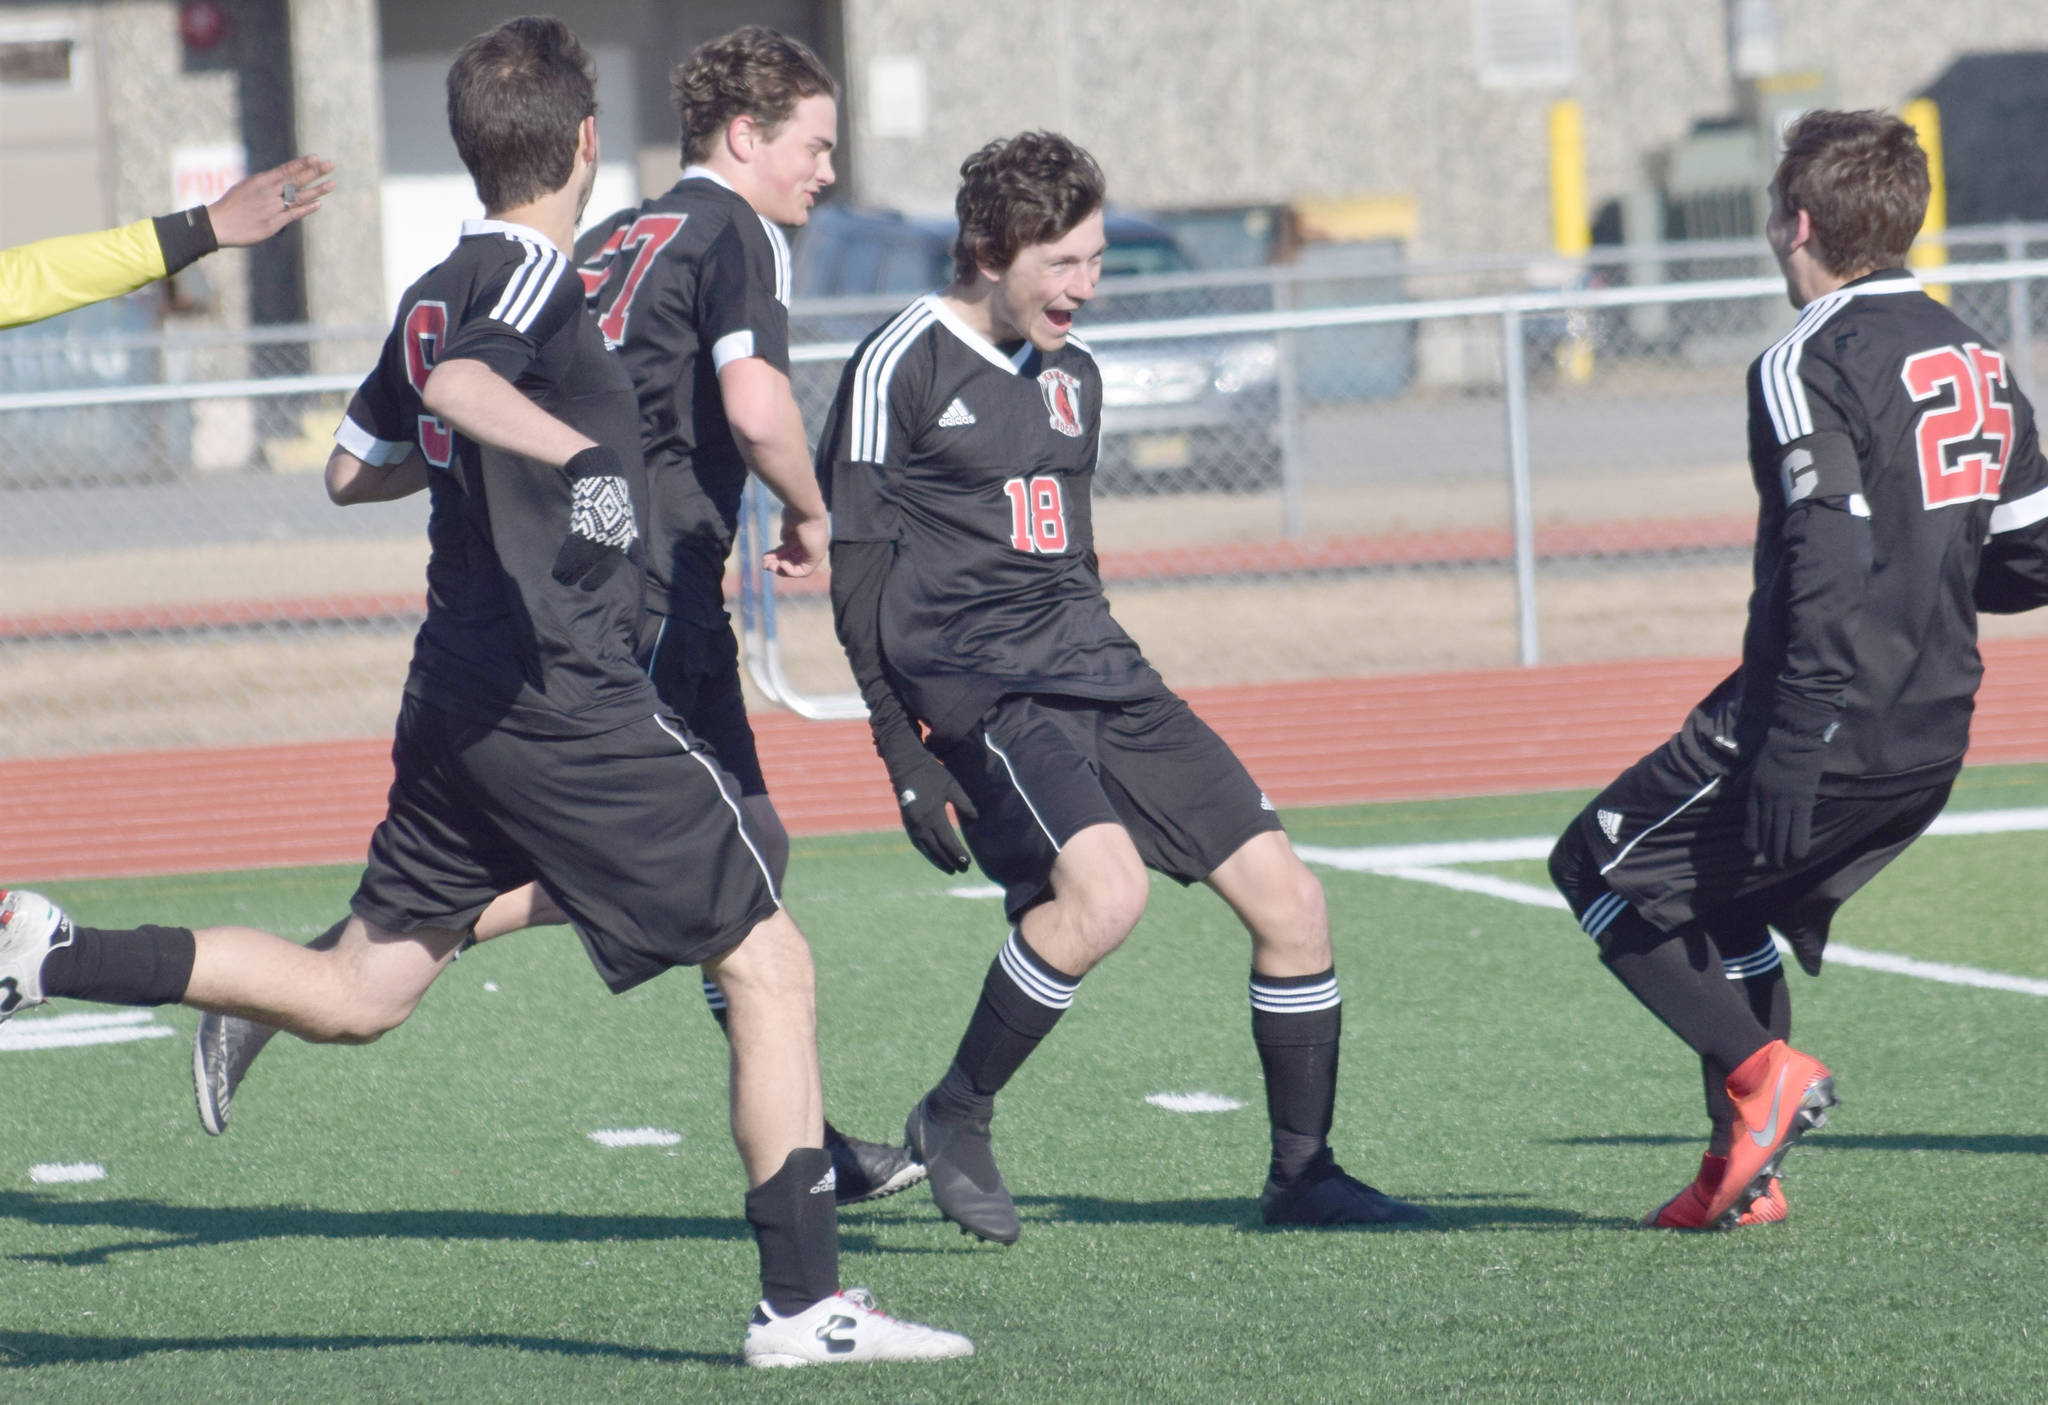 Damien Redder (18) celebrates the first of his three goals with teammates Monday, April 22, 2019, at Ed Hollier Field at Kenai Central High School in Kenai, Alaska. (Photo by Jeff Helminiak)